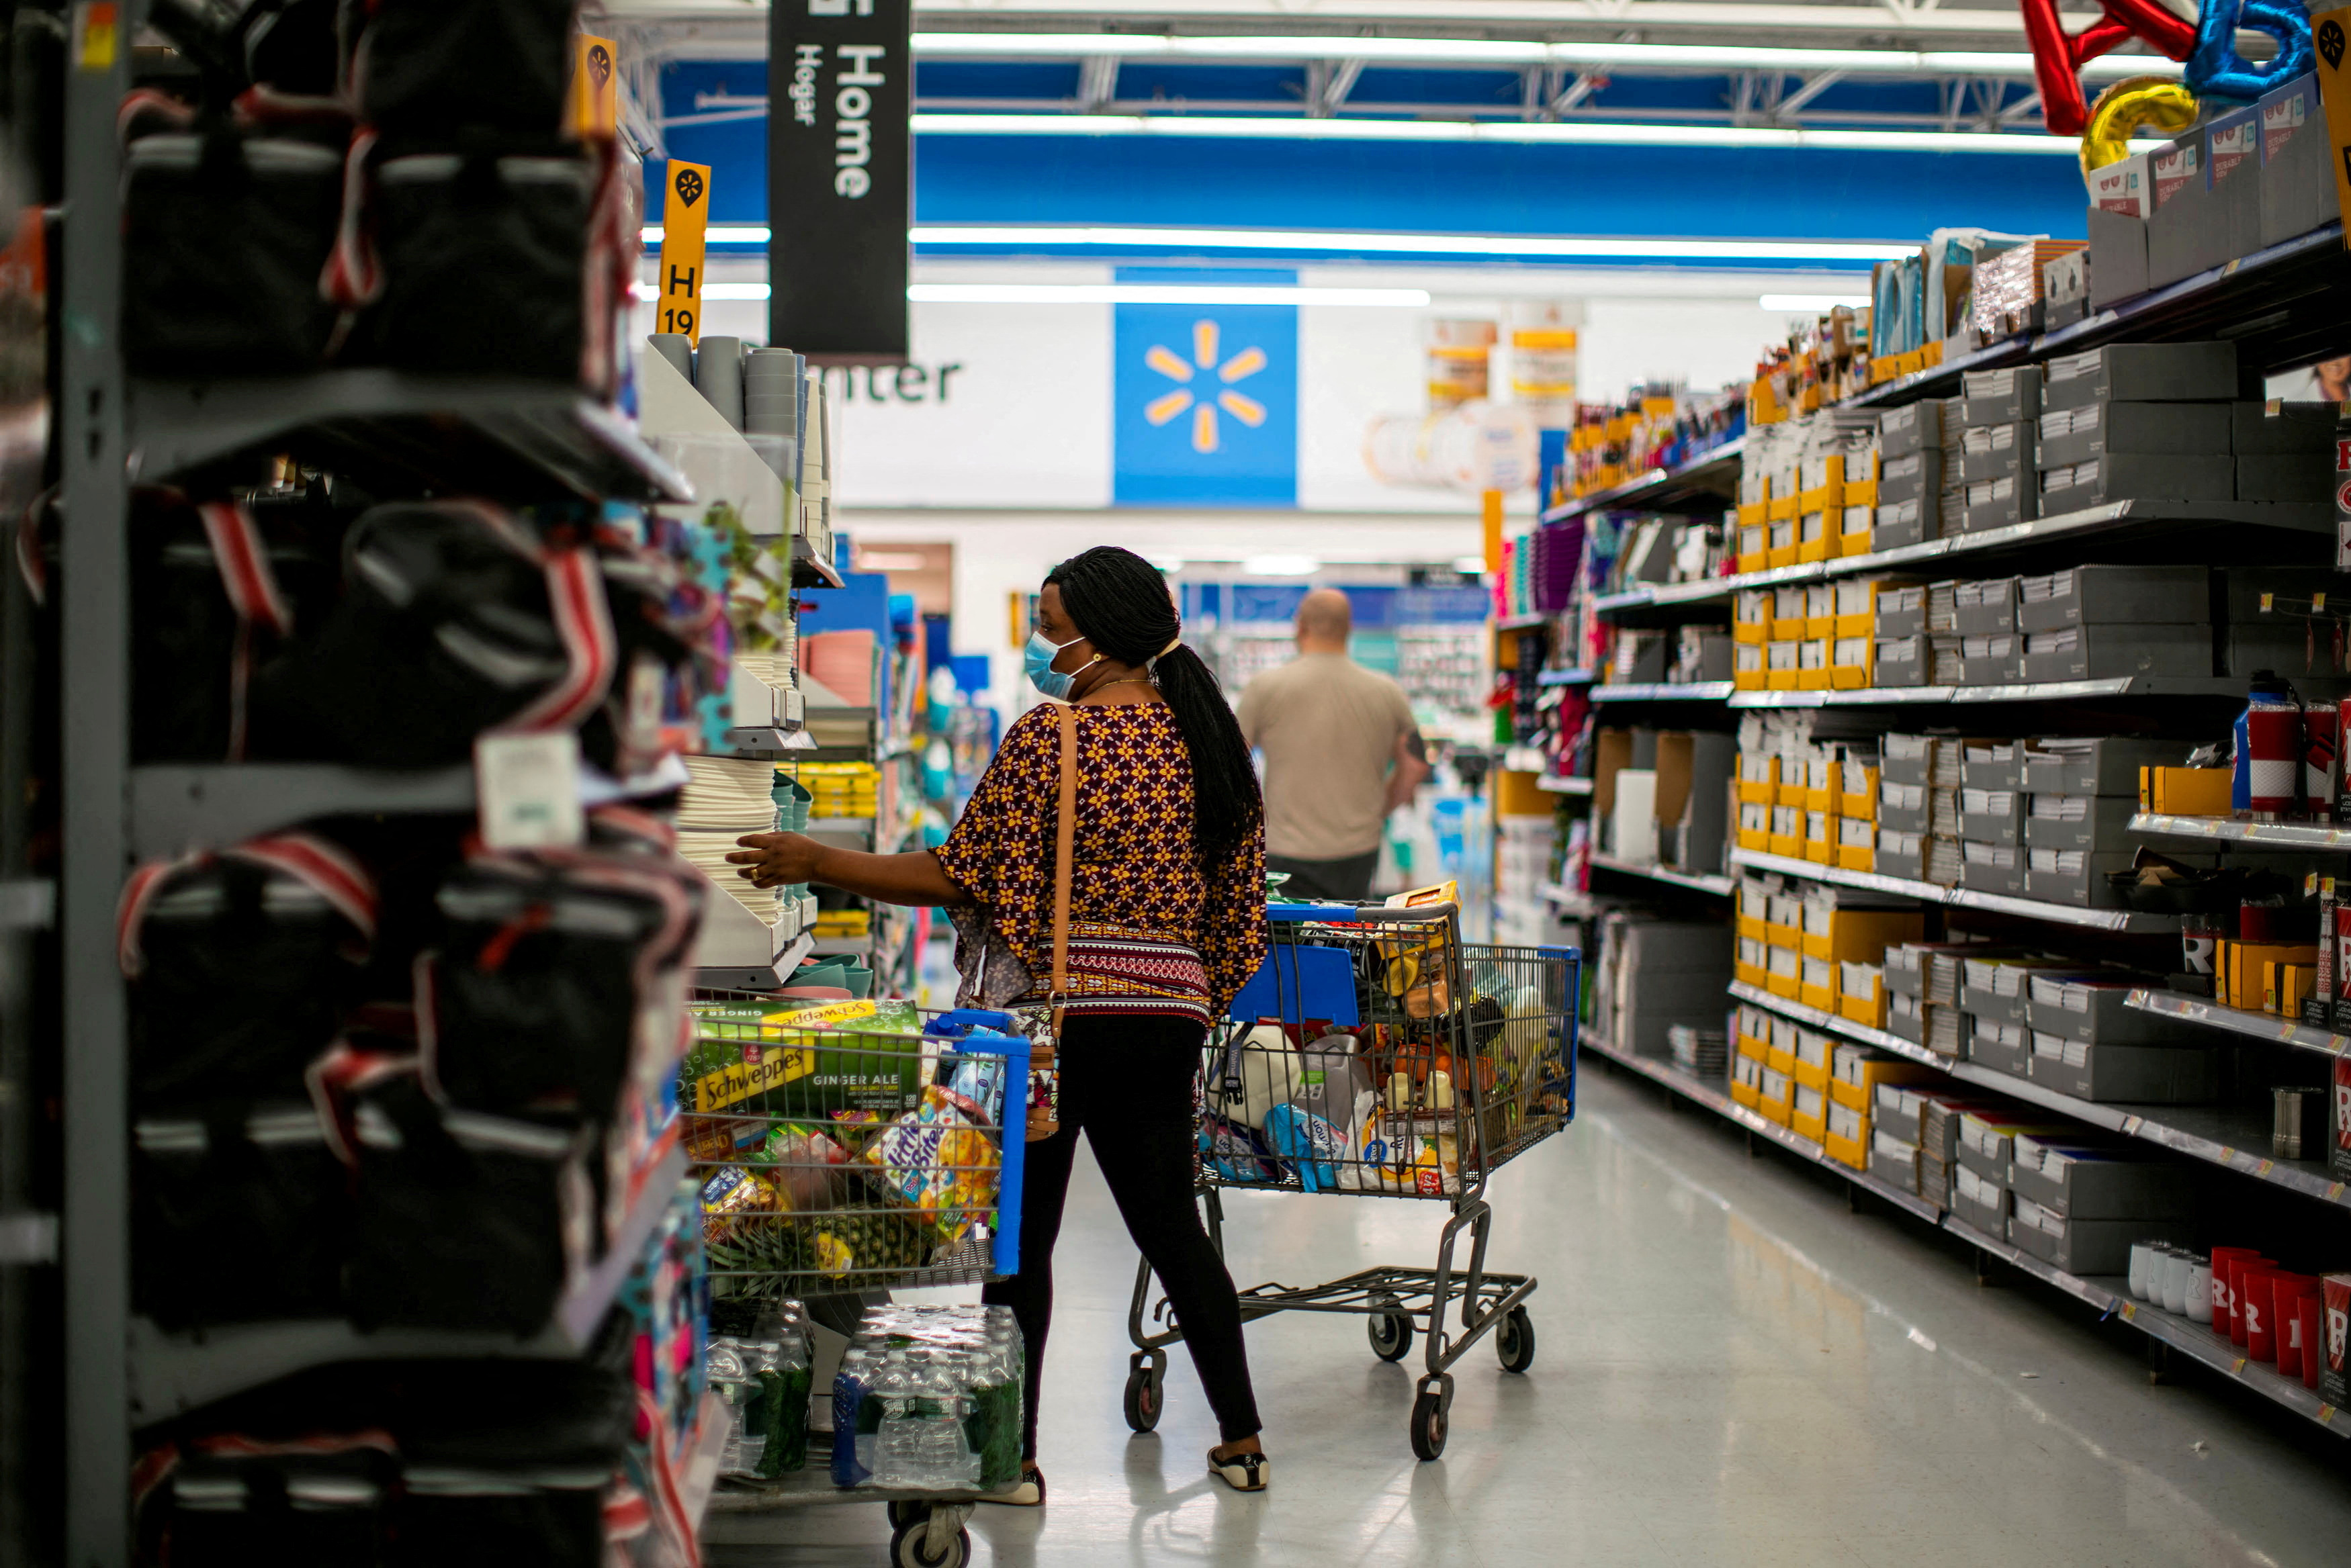 A shopper is seen wearing a mask while shopping at a Walmart store, in North Brunswick, New Jersey